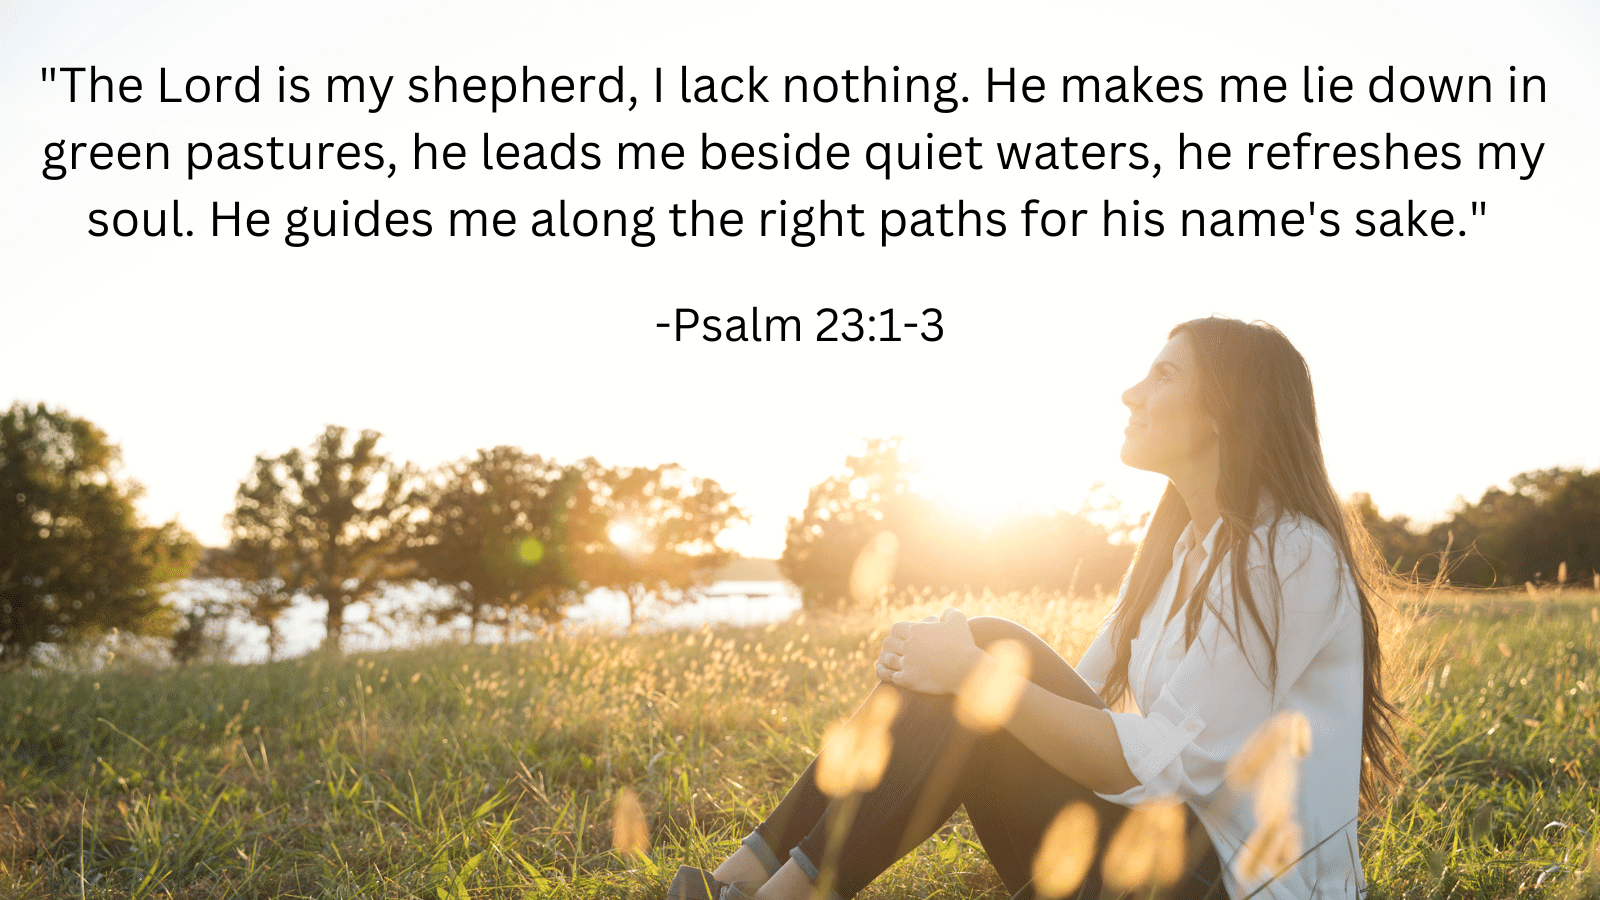 Woman sitting outside in field with Psalm 23:1-3